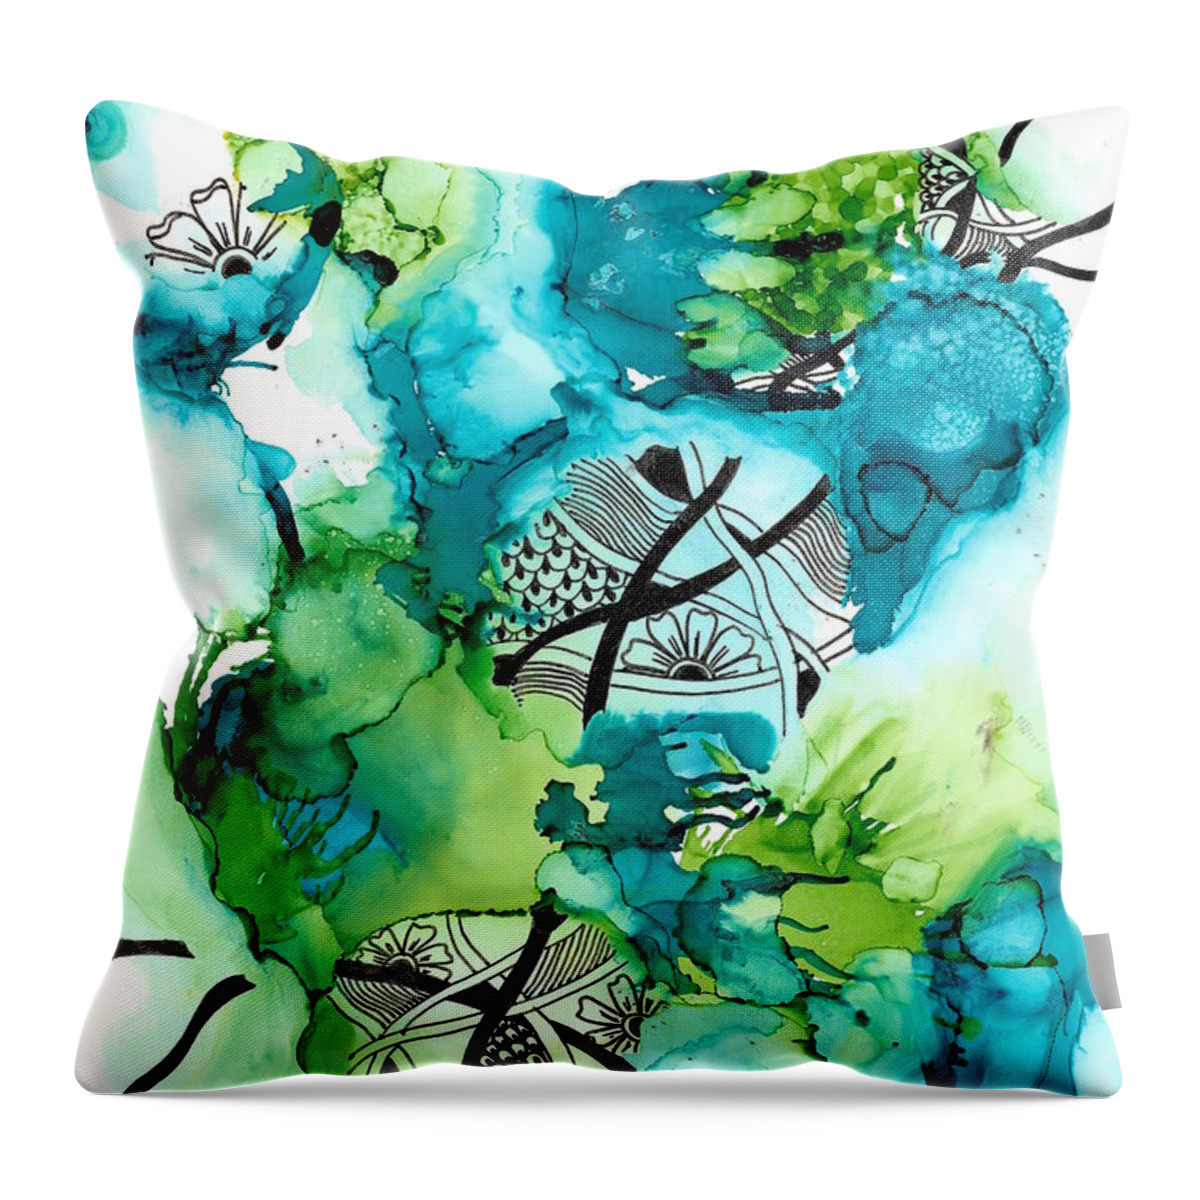 Zentangle Throw Pillow featuring the drawing Hidden Treasure by Jan Steinle